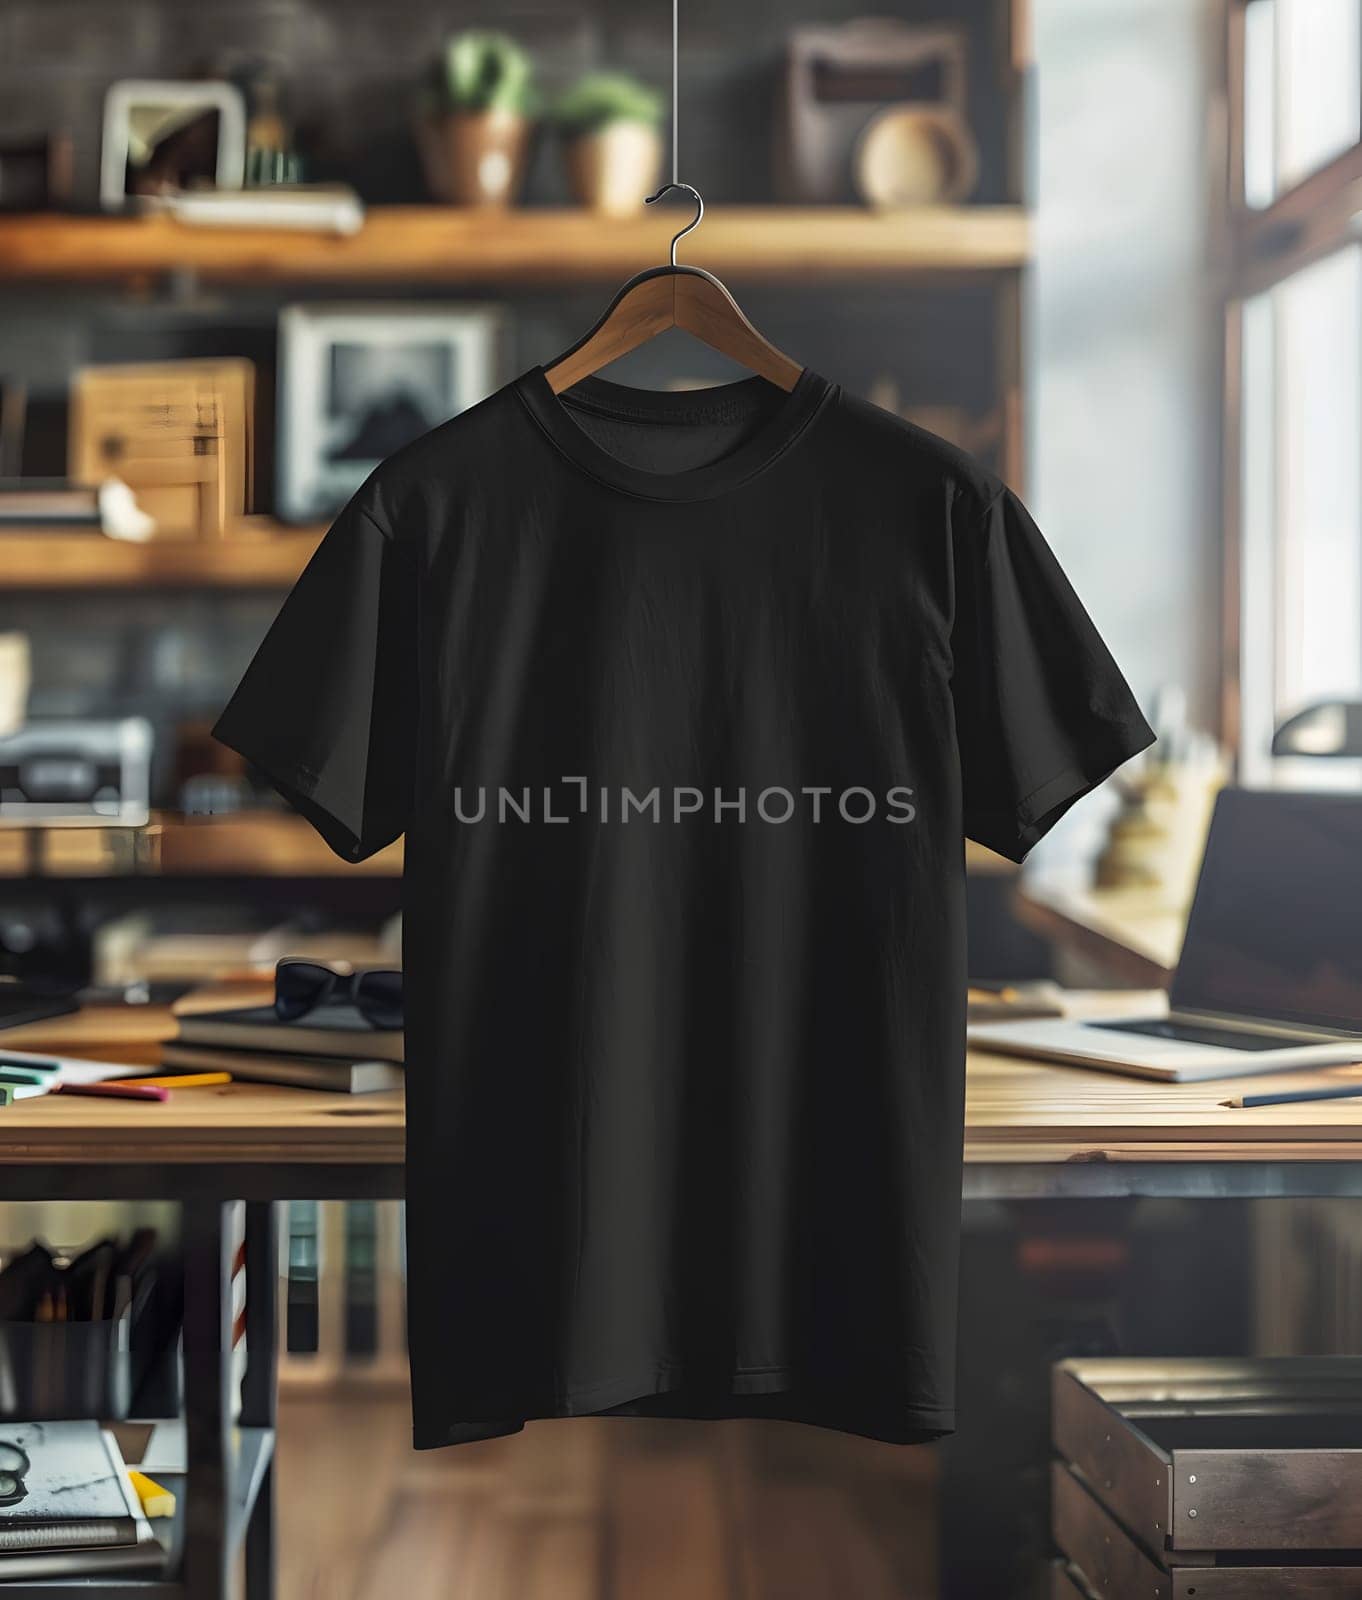 A stylish black tshirt with short sleeves is displayed on a wooden clothes hanger in a room. The fashion design and metal detail make it perfect for a formal wear event